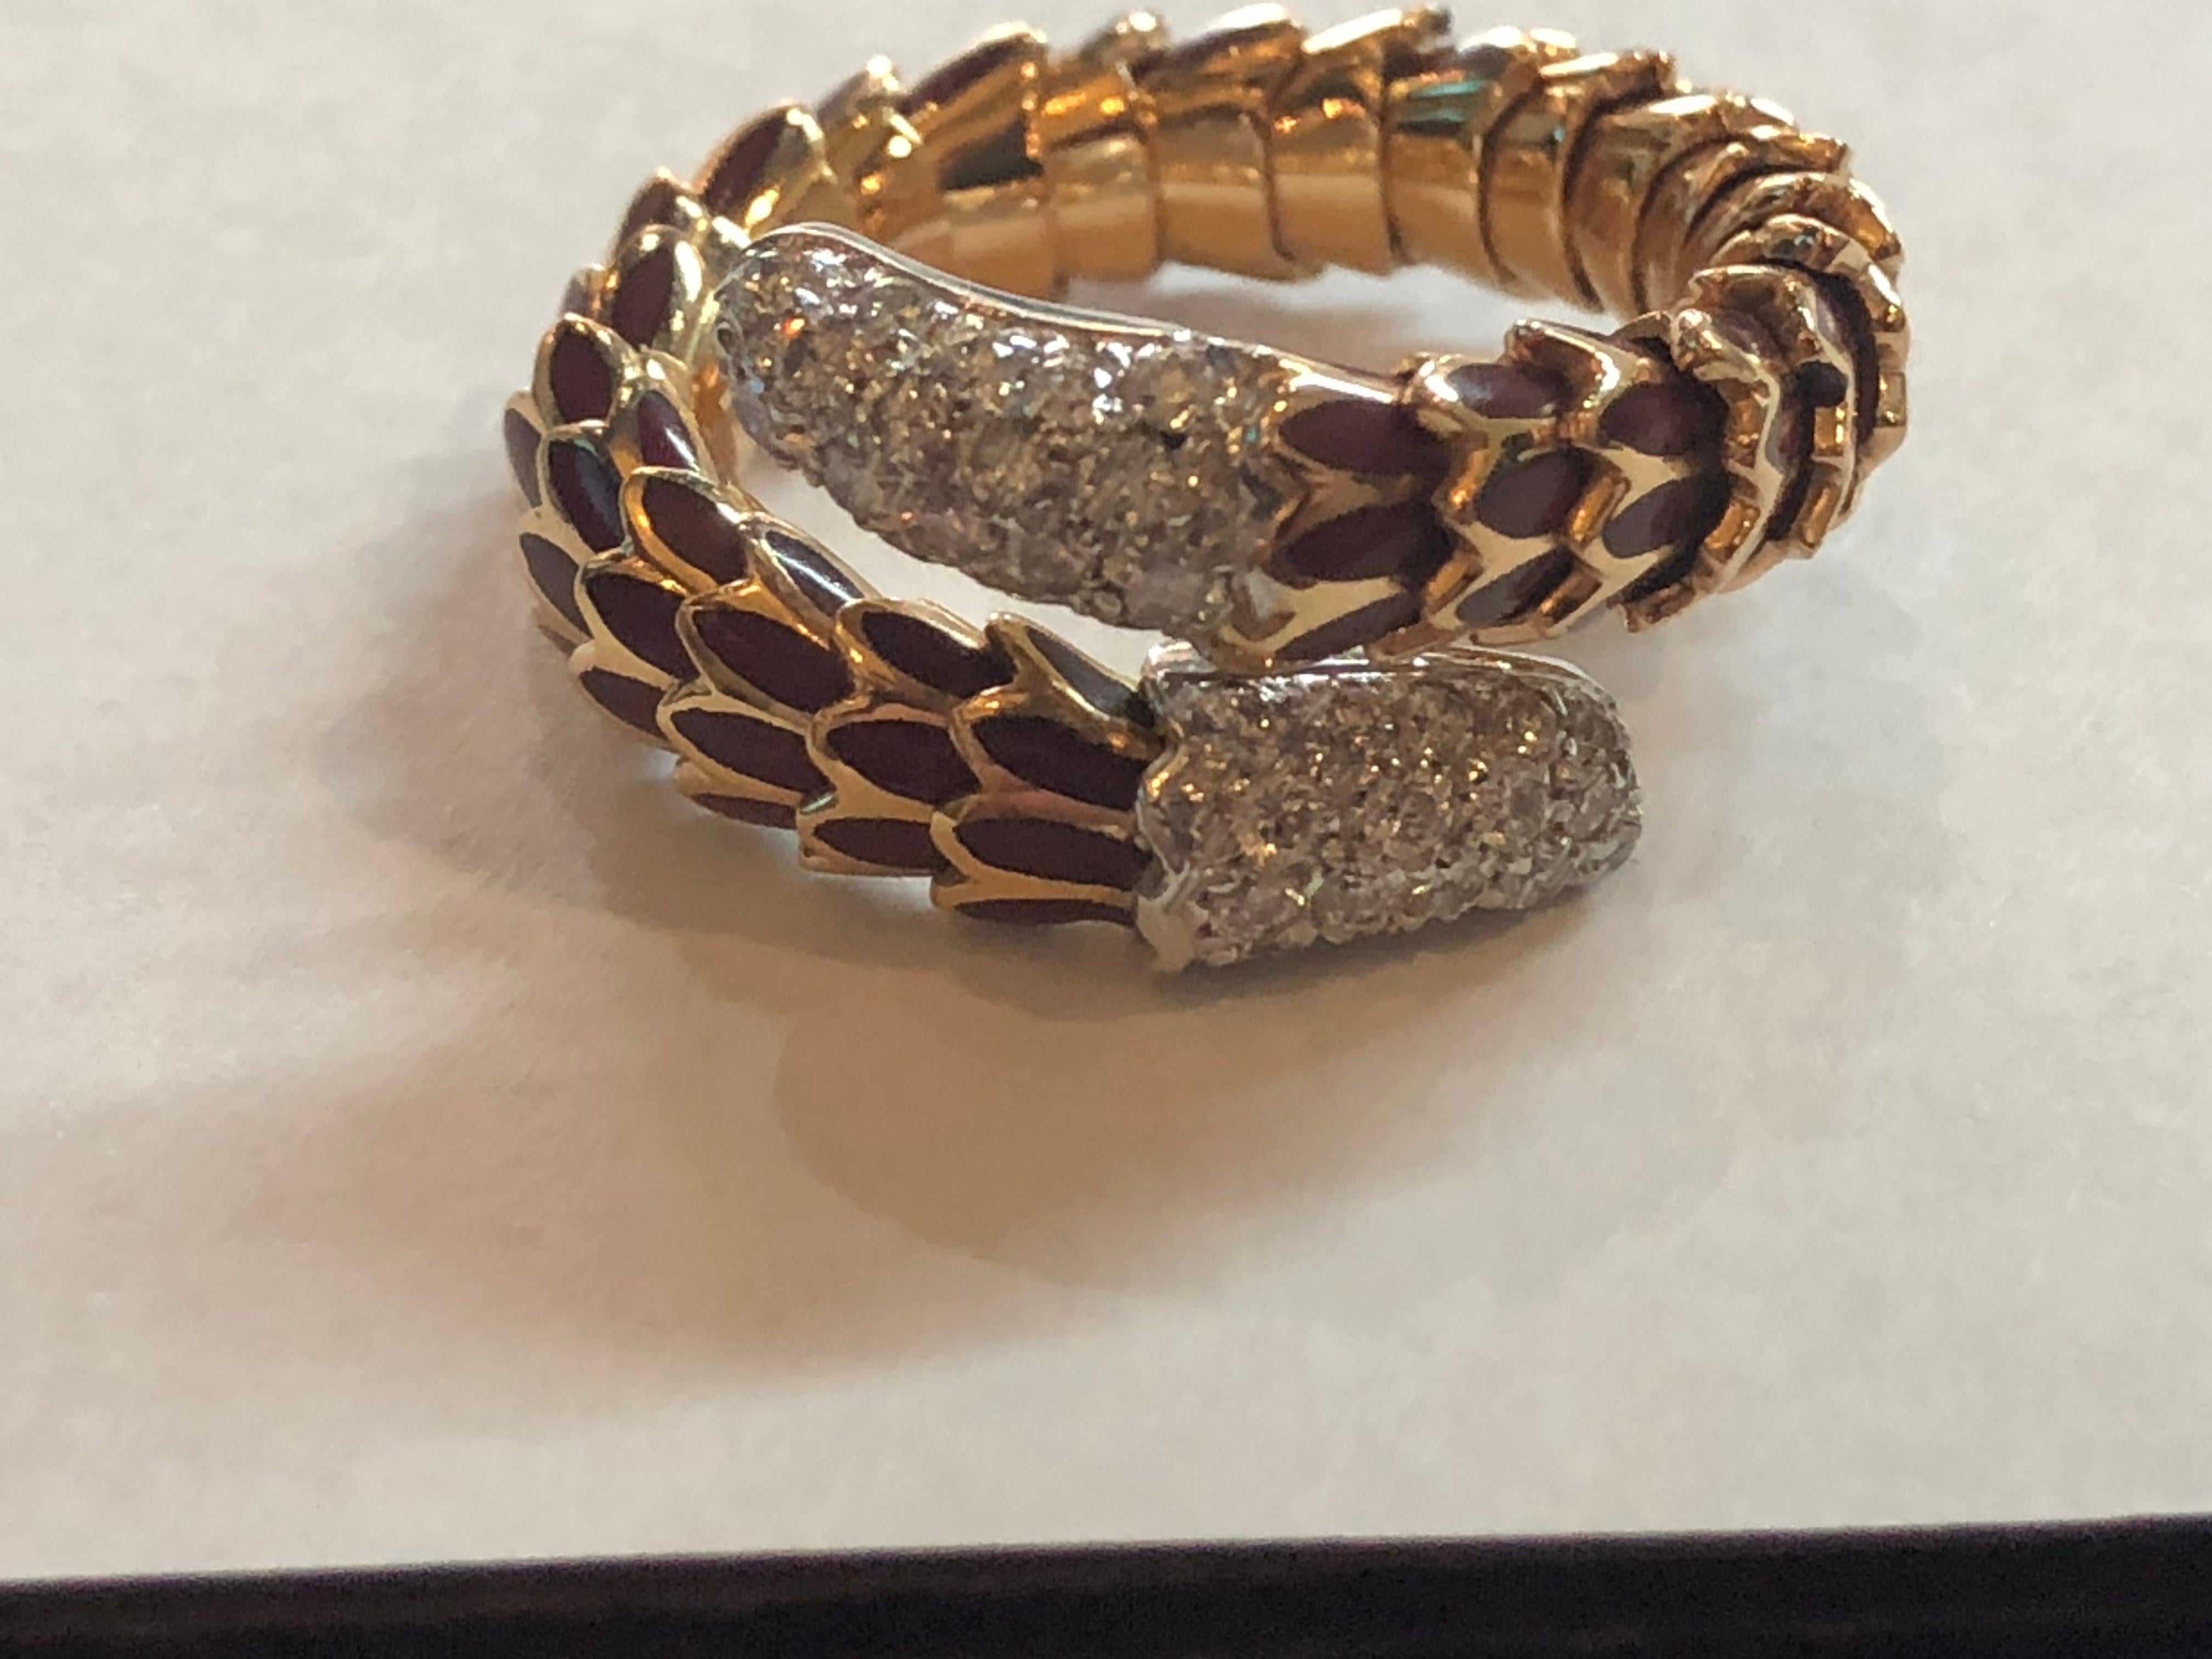 Roberto Coin 40 Diamond Enamel 18K Rose Gold Snake Design Ring
Size 5.5 and it is flexible so it can be worn on multiple fingers
40 diamons that Are VS in clarity and F-G in Color 
.40 ct total diamond weight
18k Rose Gold weighing 11.0